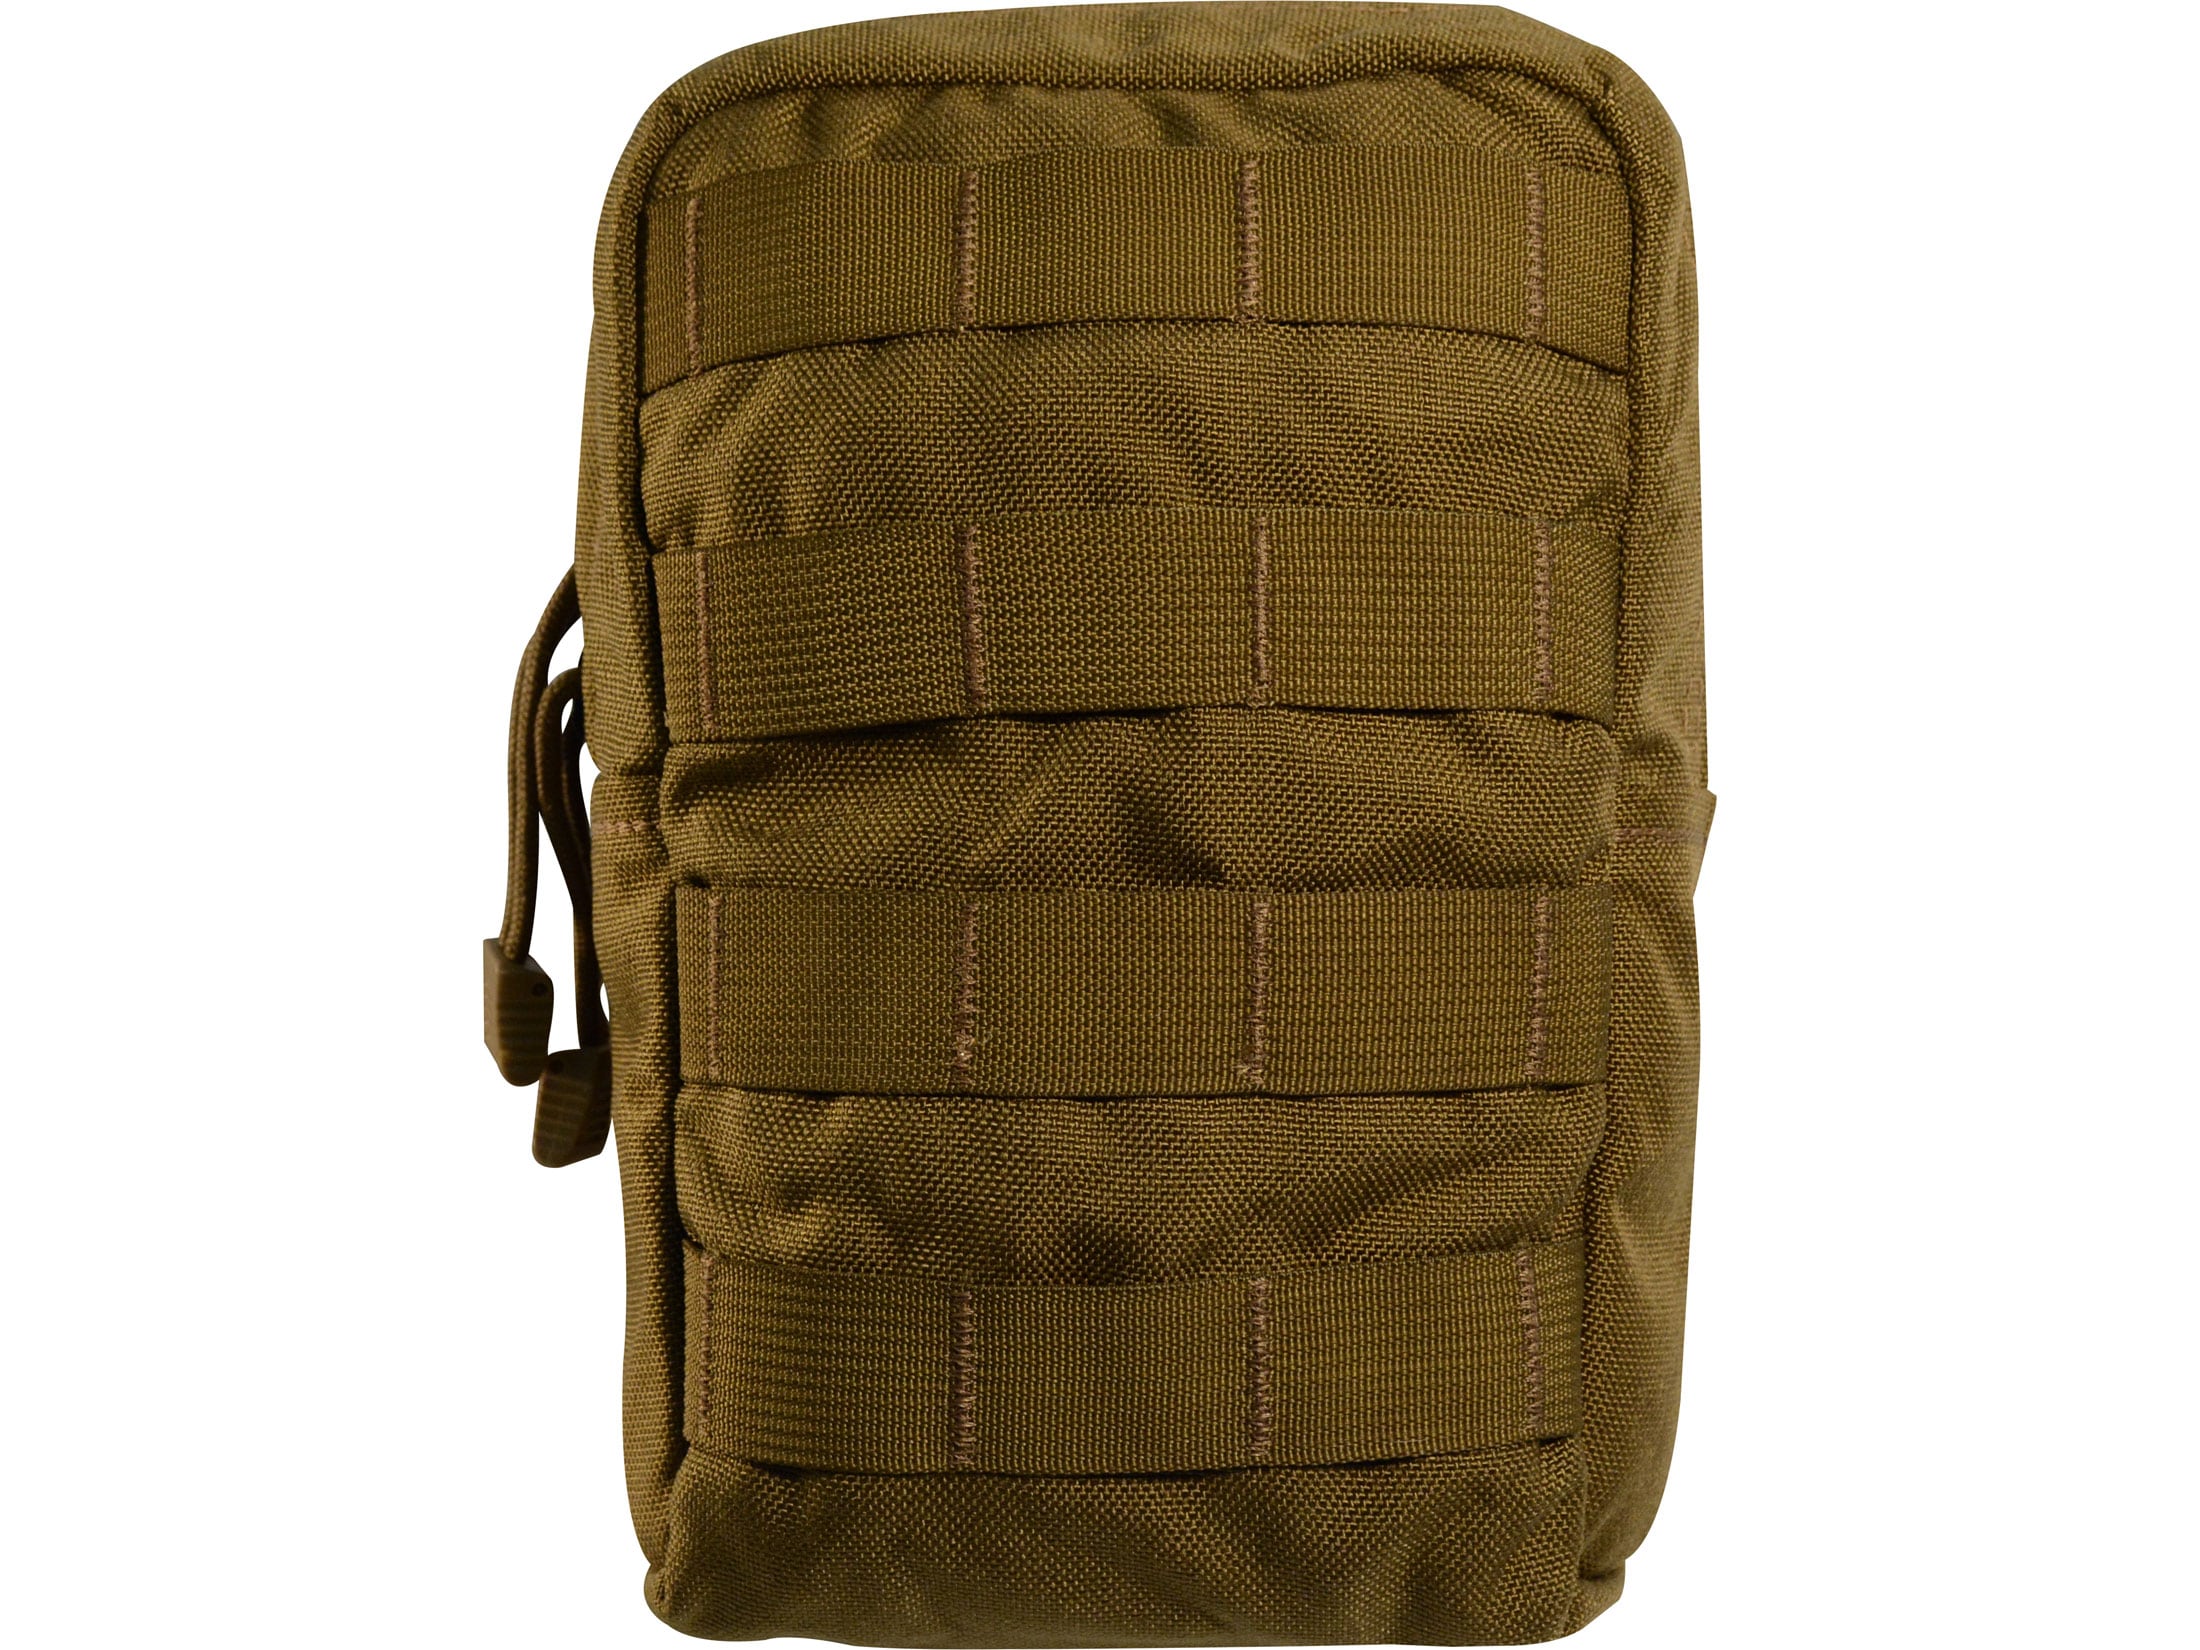 Military Surplus MOLLE II Utility Pouch Grade 1 Coyote Tan